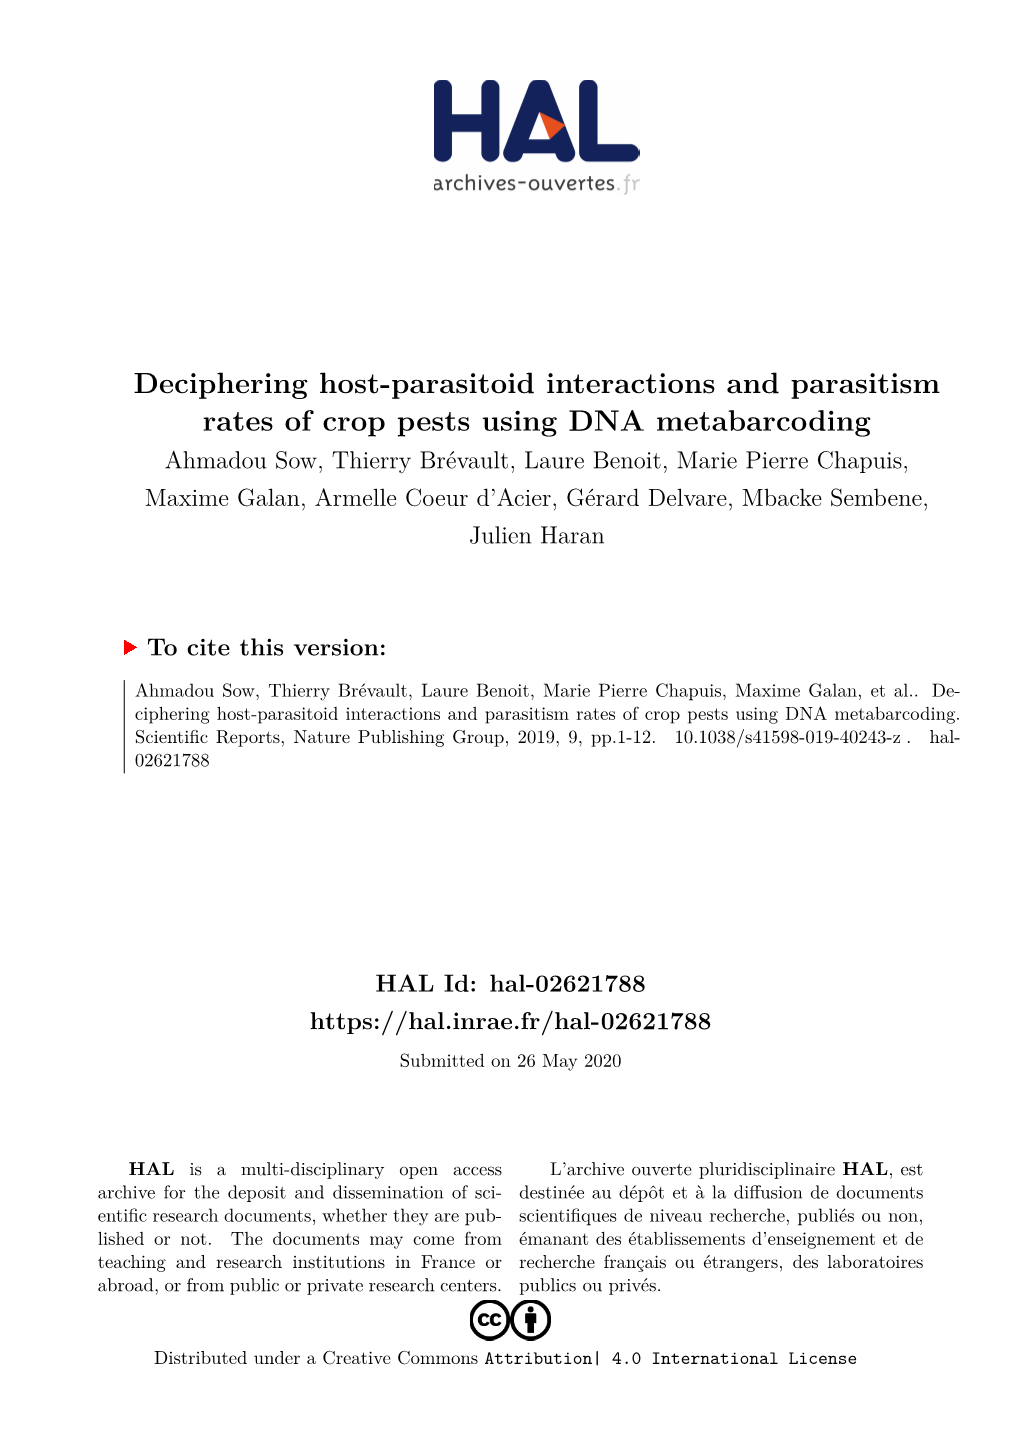 Deciphering Host-Parasitoid Interactions and Parasitism Rates Of